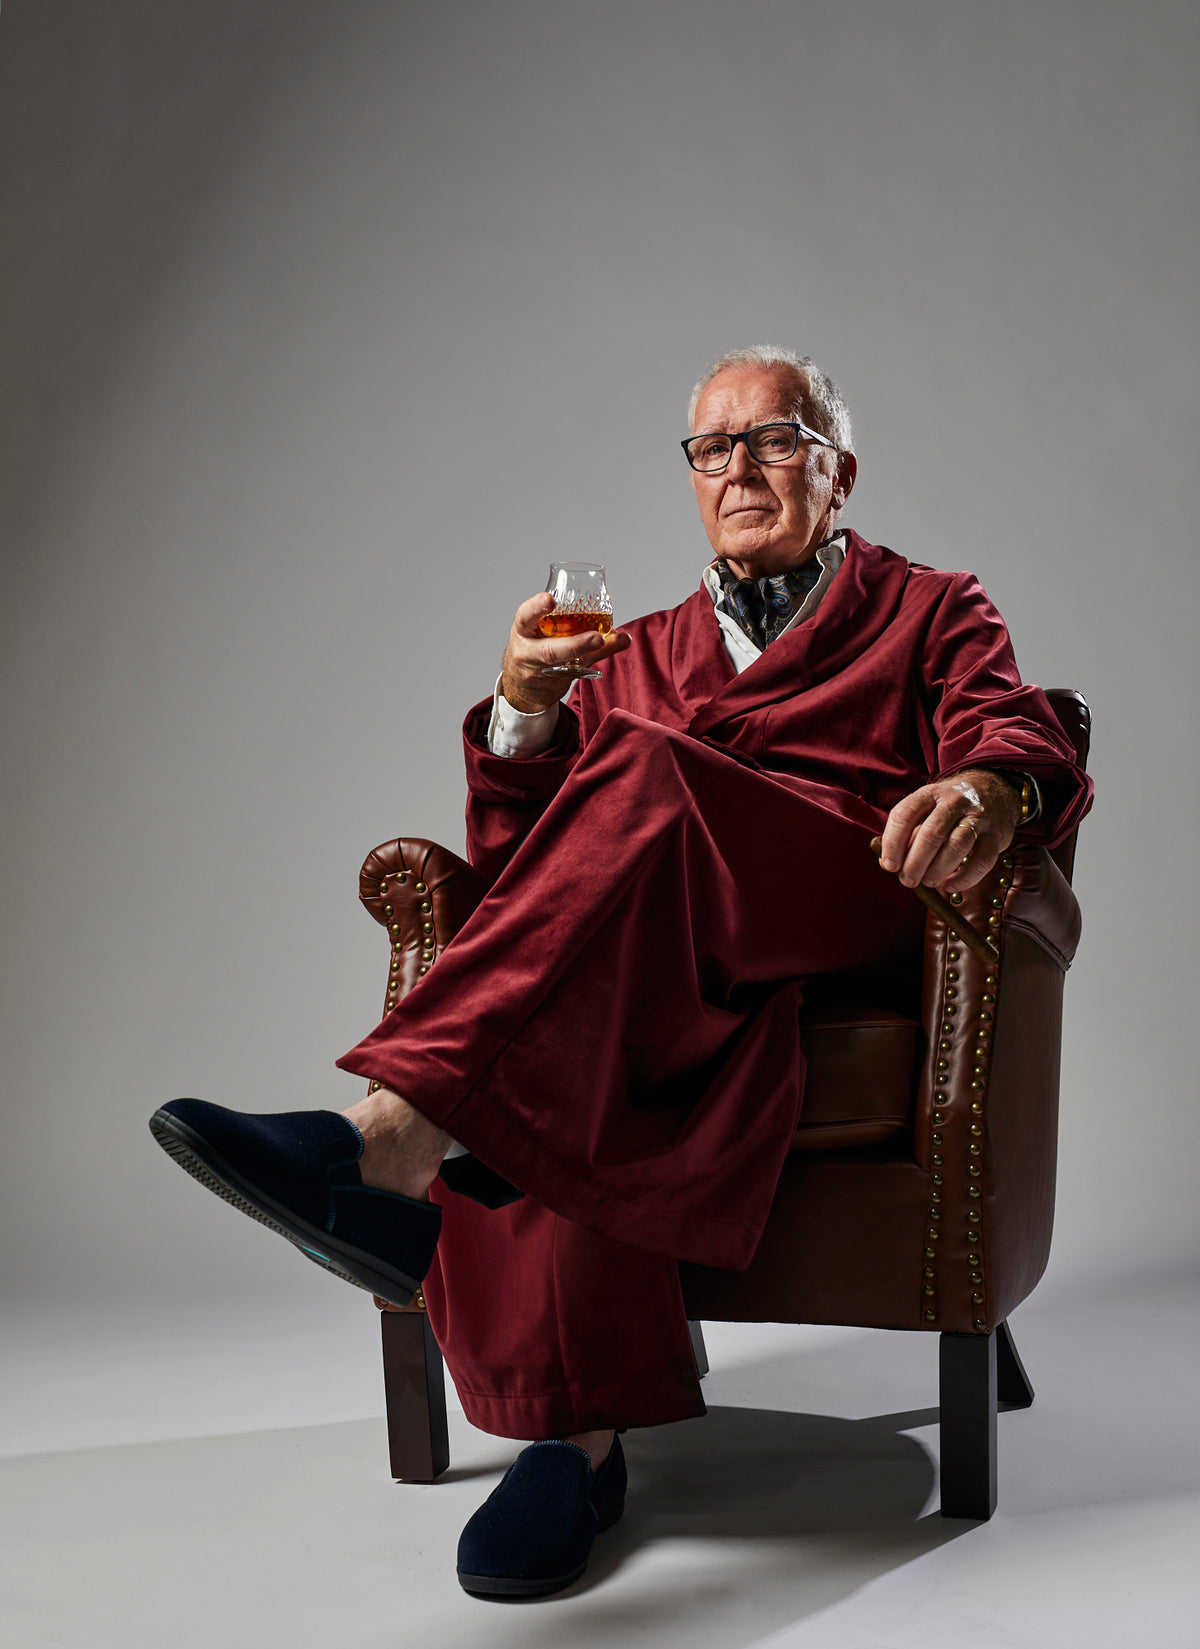 Low angle image of a wealthy man wearing a Red Video Production Robe holding a cigar and a glass of scotch